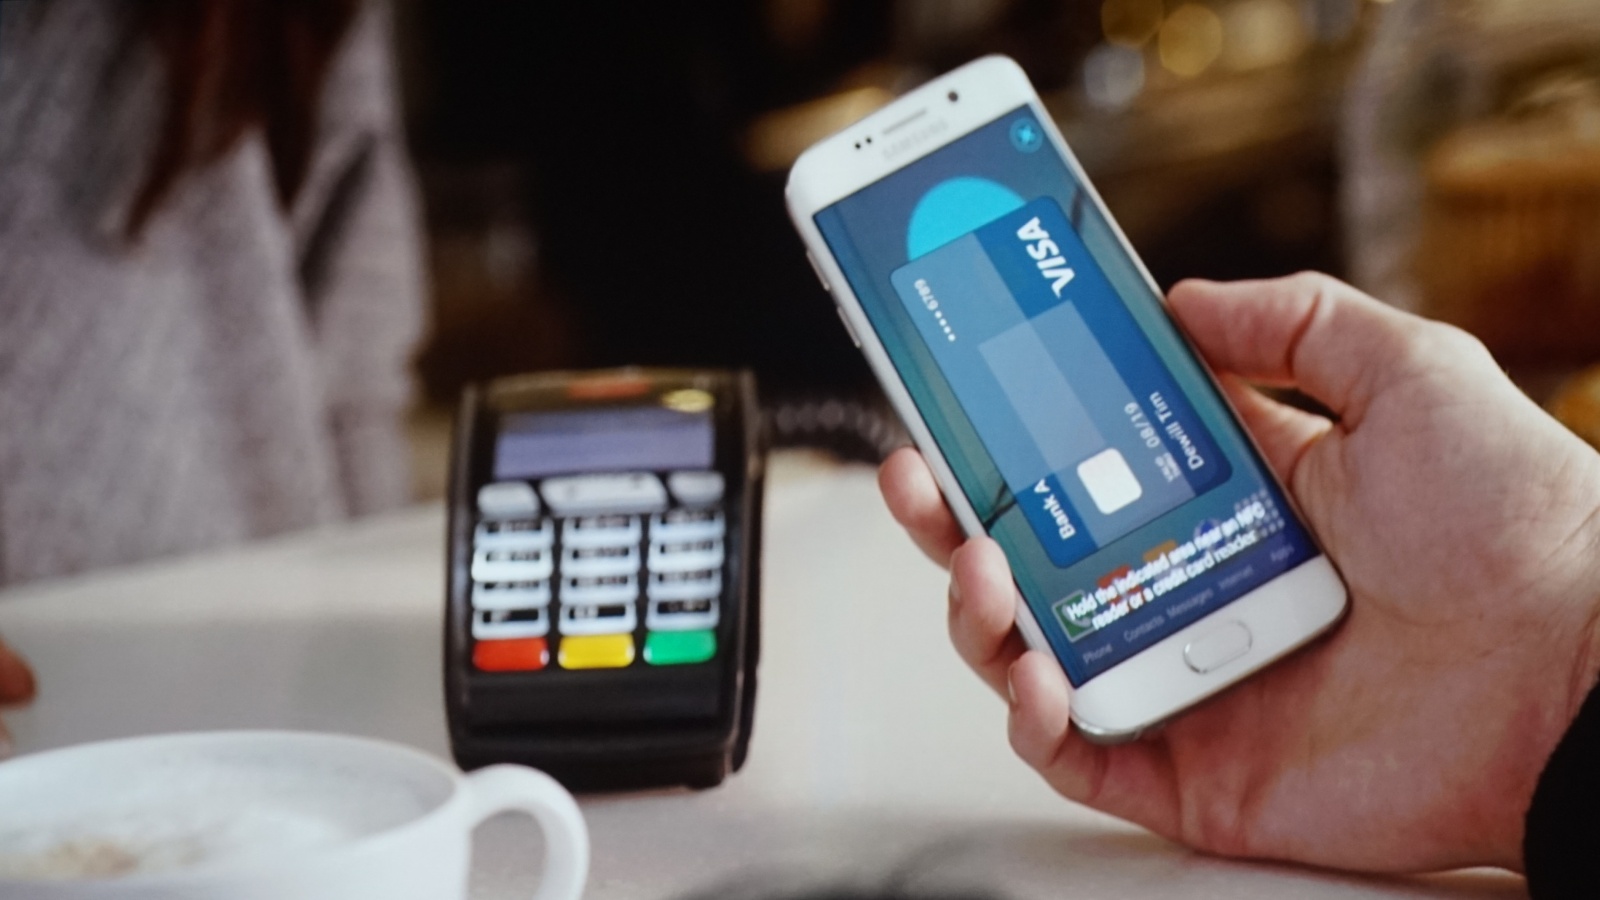 samsung-pay-arrives-to-take-on-apple-in-china-image-cultofandroidcomwp-contentuploads201504samsung_pay_0_0-1-jpg